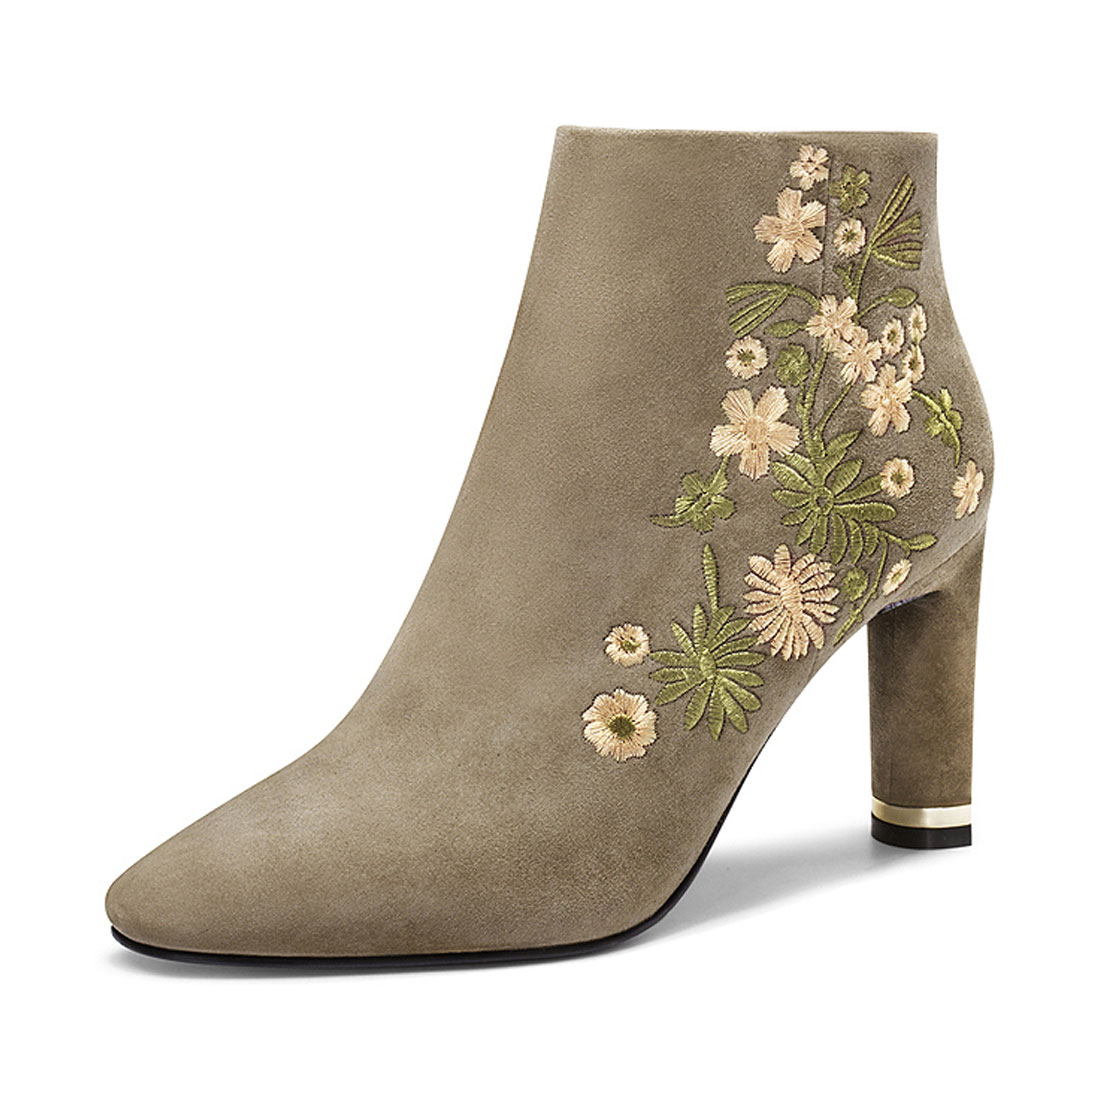 2018 suede leather with flower embroidery winter dress ladies ankle boot  YH1214